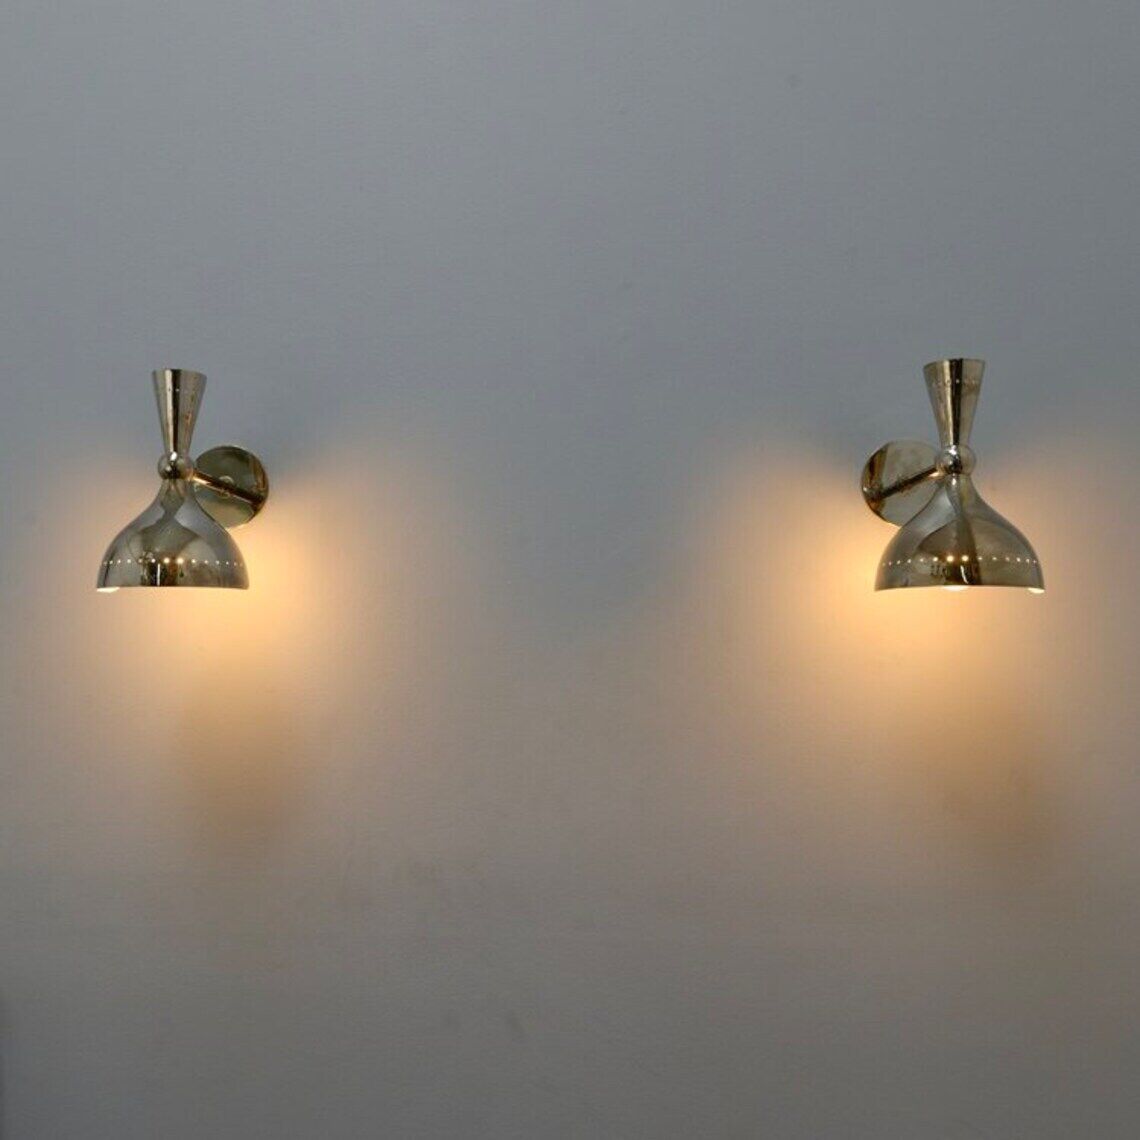 Mid Century Modern Italian Wall Lamp | Chrome and Polished Brass Wall Sconce for Elegant Decor